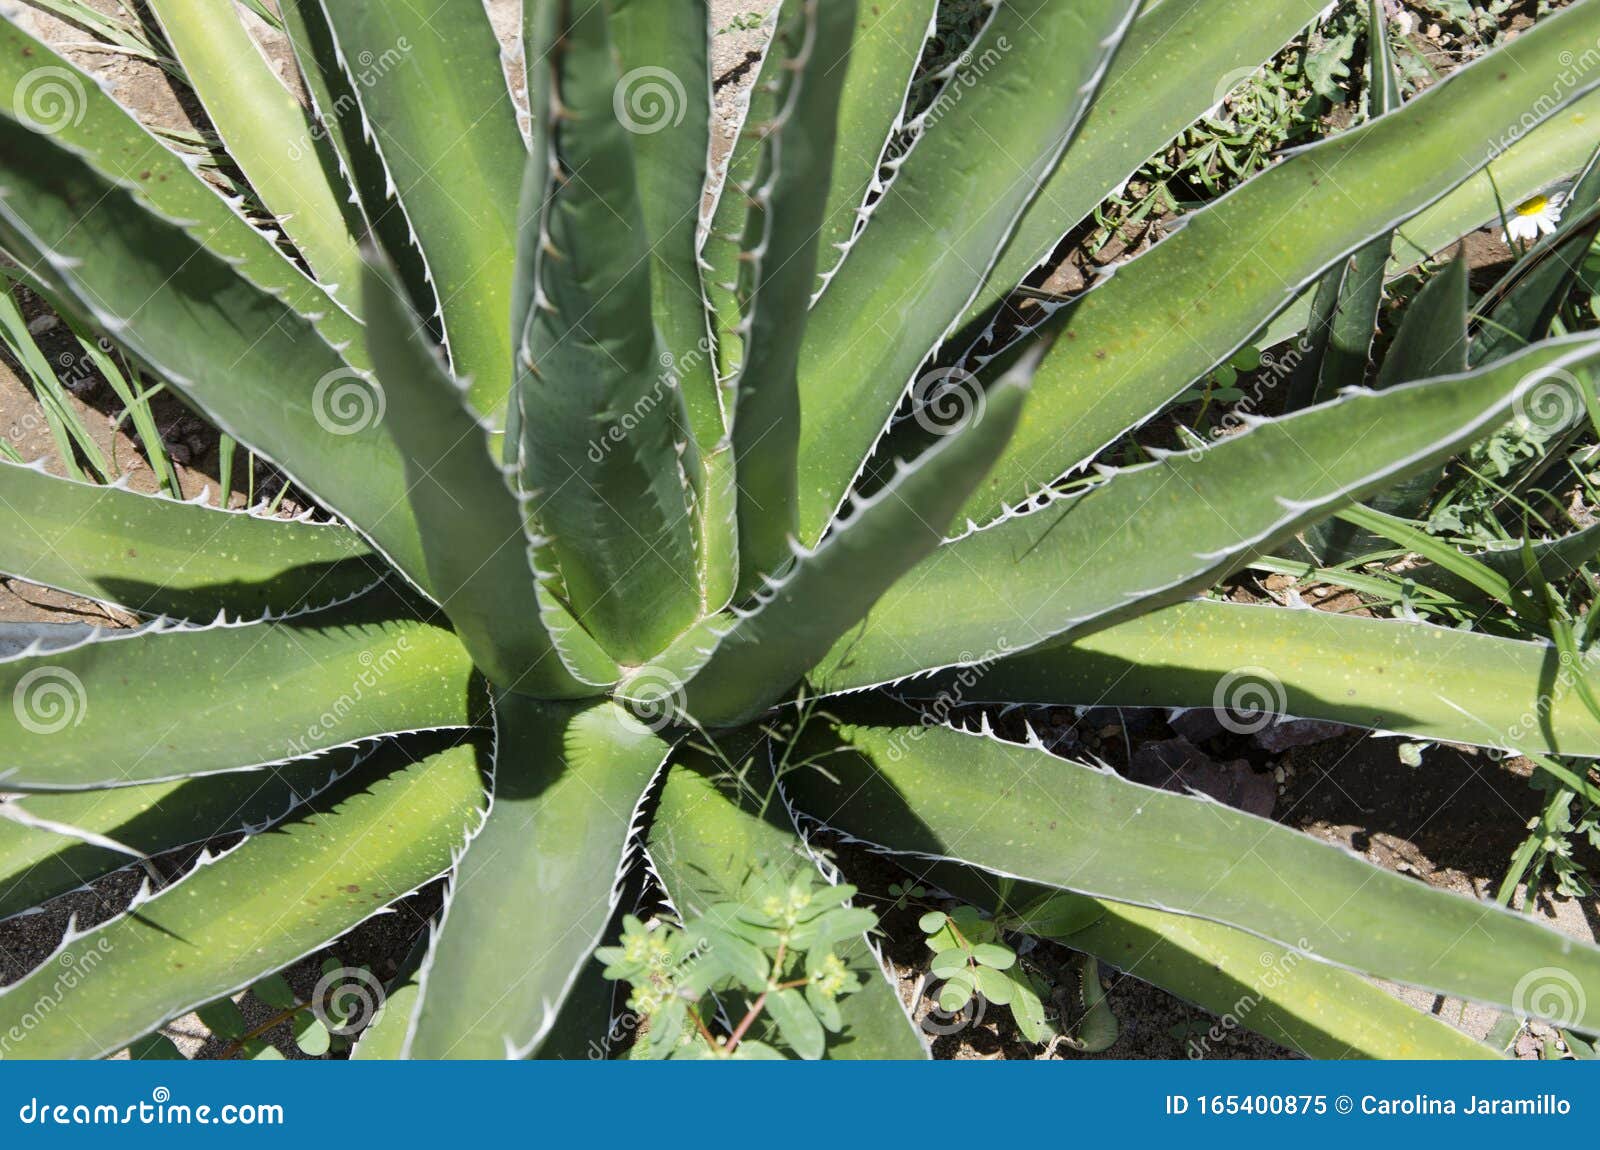 agave kerchovei, mexican desert plant with spiny green leaves